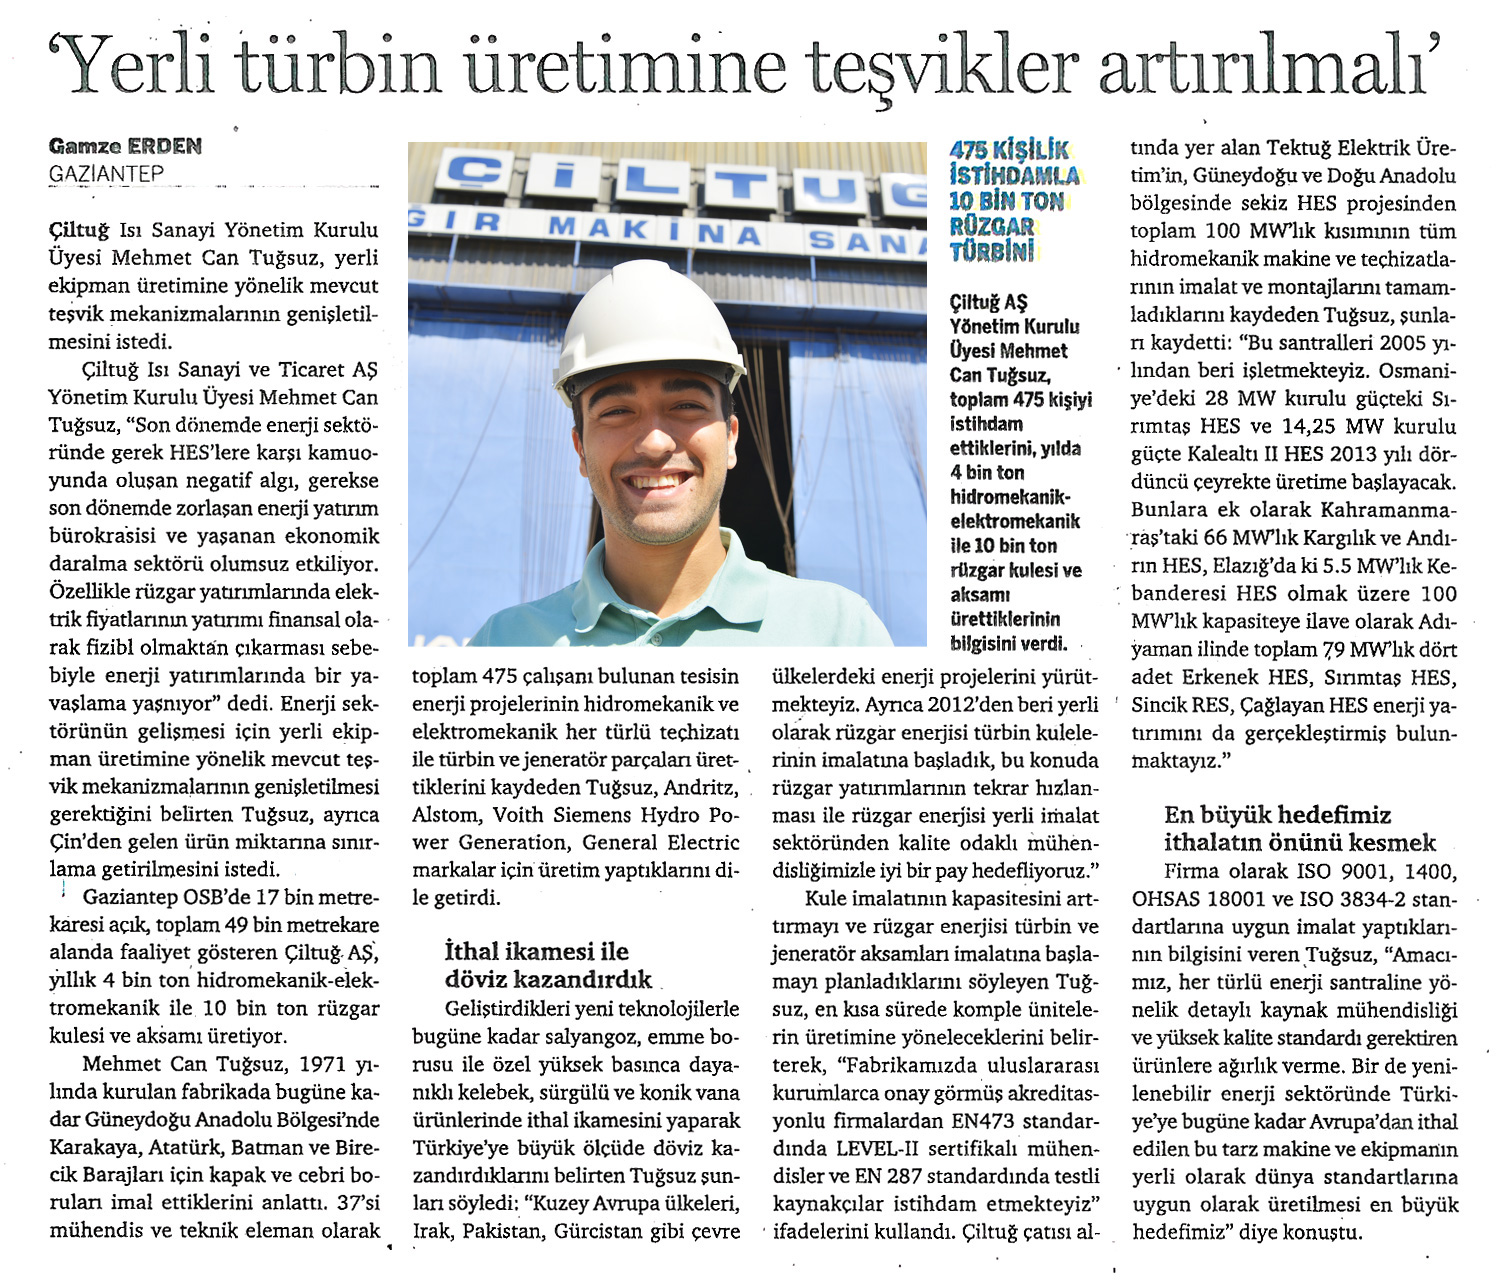 Incentives should be increased for production of new turbins